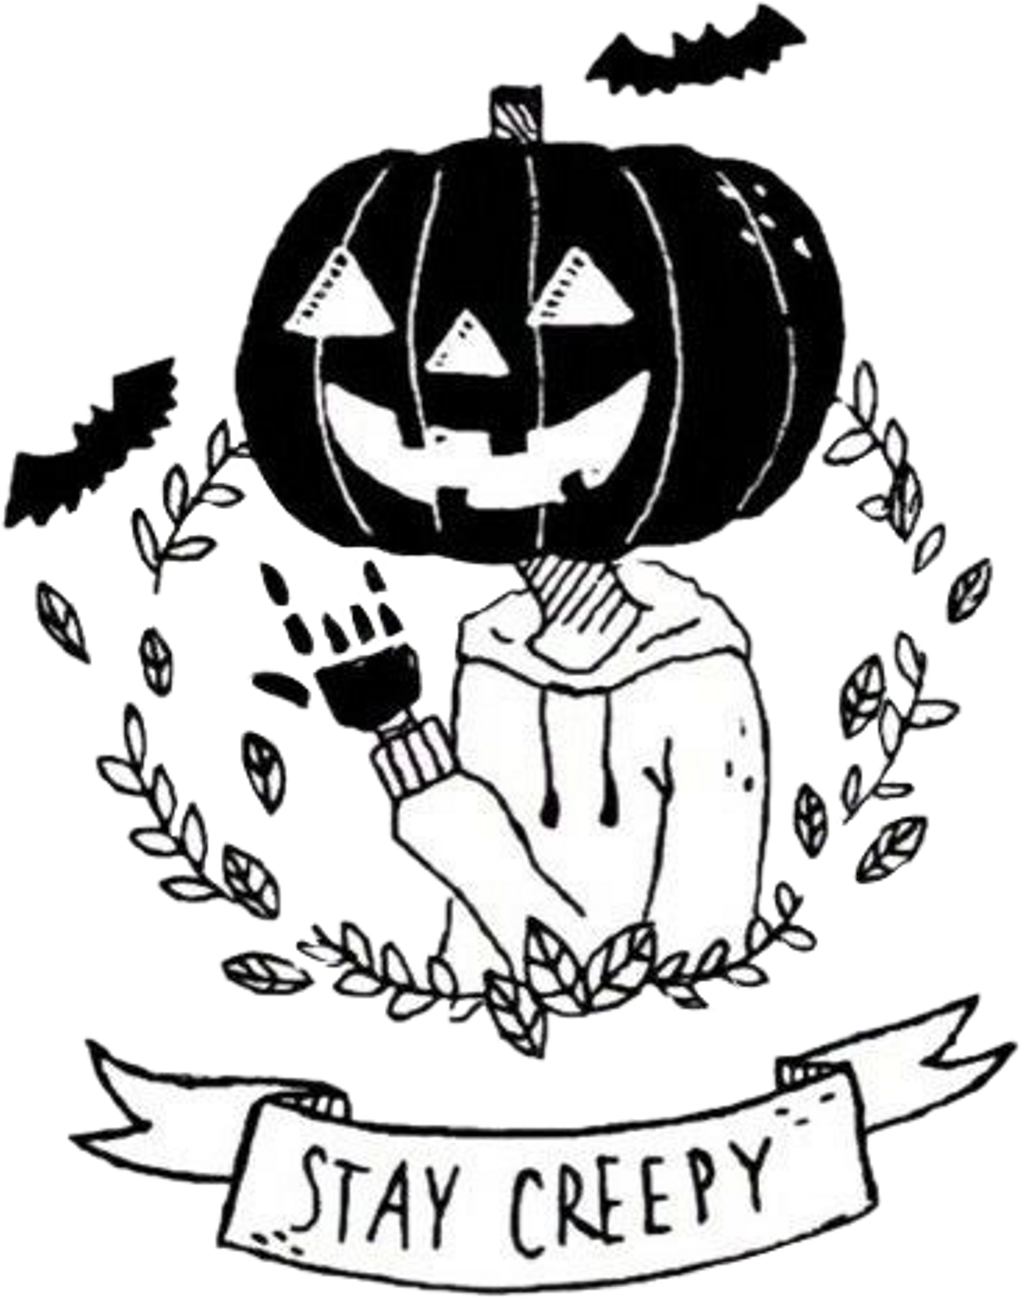 Halloween Aesthetic PNG Free File Download